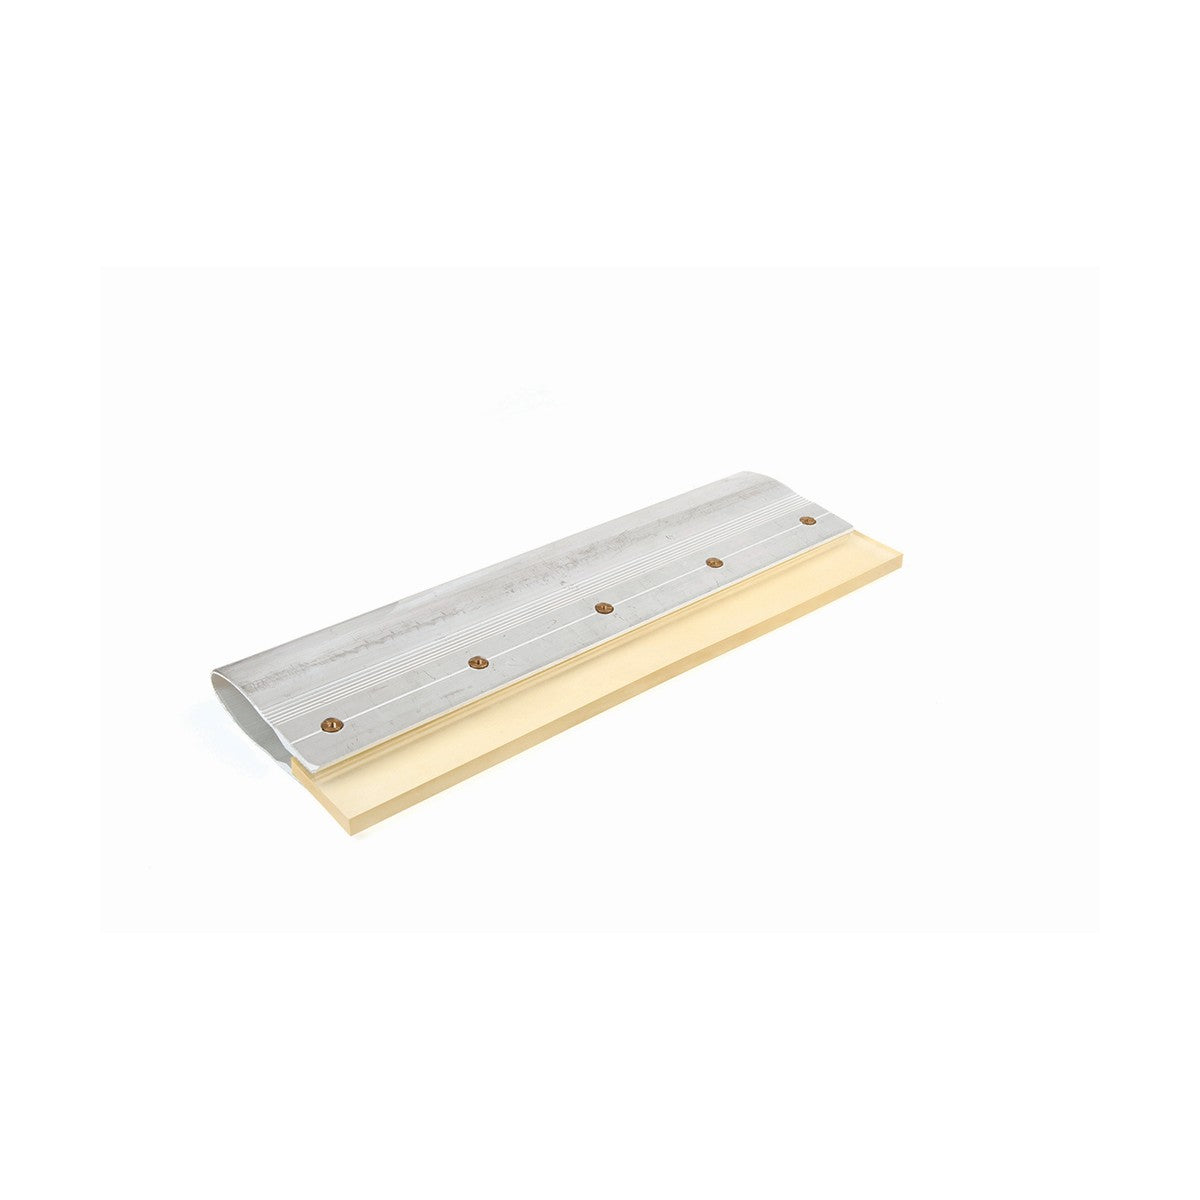 Squeegee aluminium handle with clear rubber - Melbourne Etching Supplies